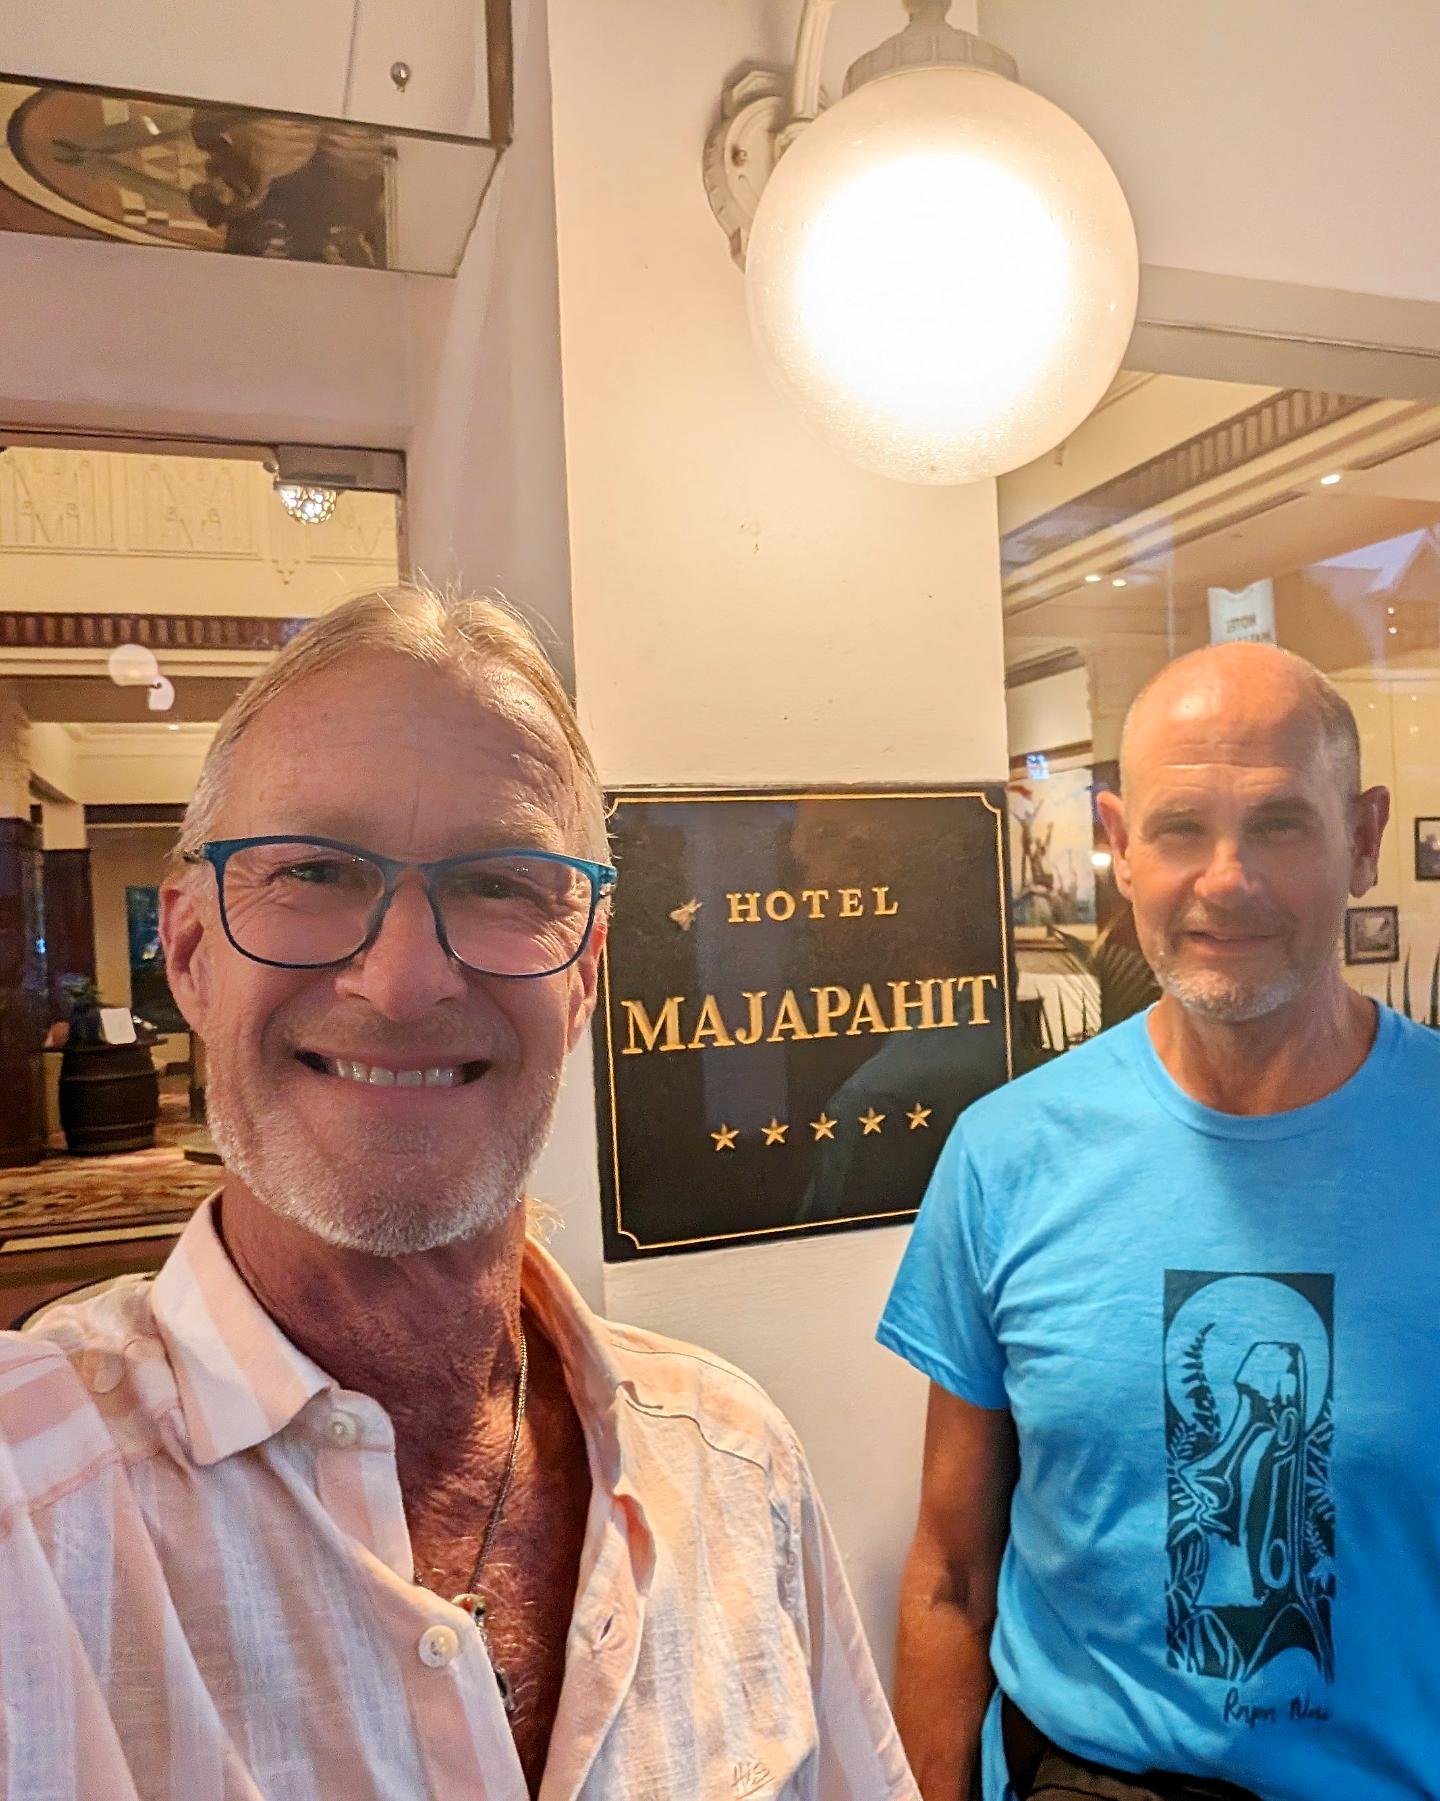 Hotel Majapahit is stately and dripping with history. ❤️🙏🏽It was a wonderful five star heritage property for our restful weekend visit to Surabaya, Indonesia. Great restaurant, GREAT staff and great overall value! ⭐⭐⭐⭐⭐
#hotelmajapahitsurabaya#hote